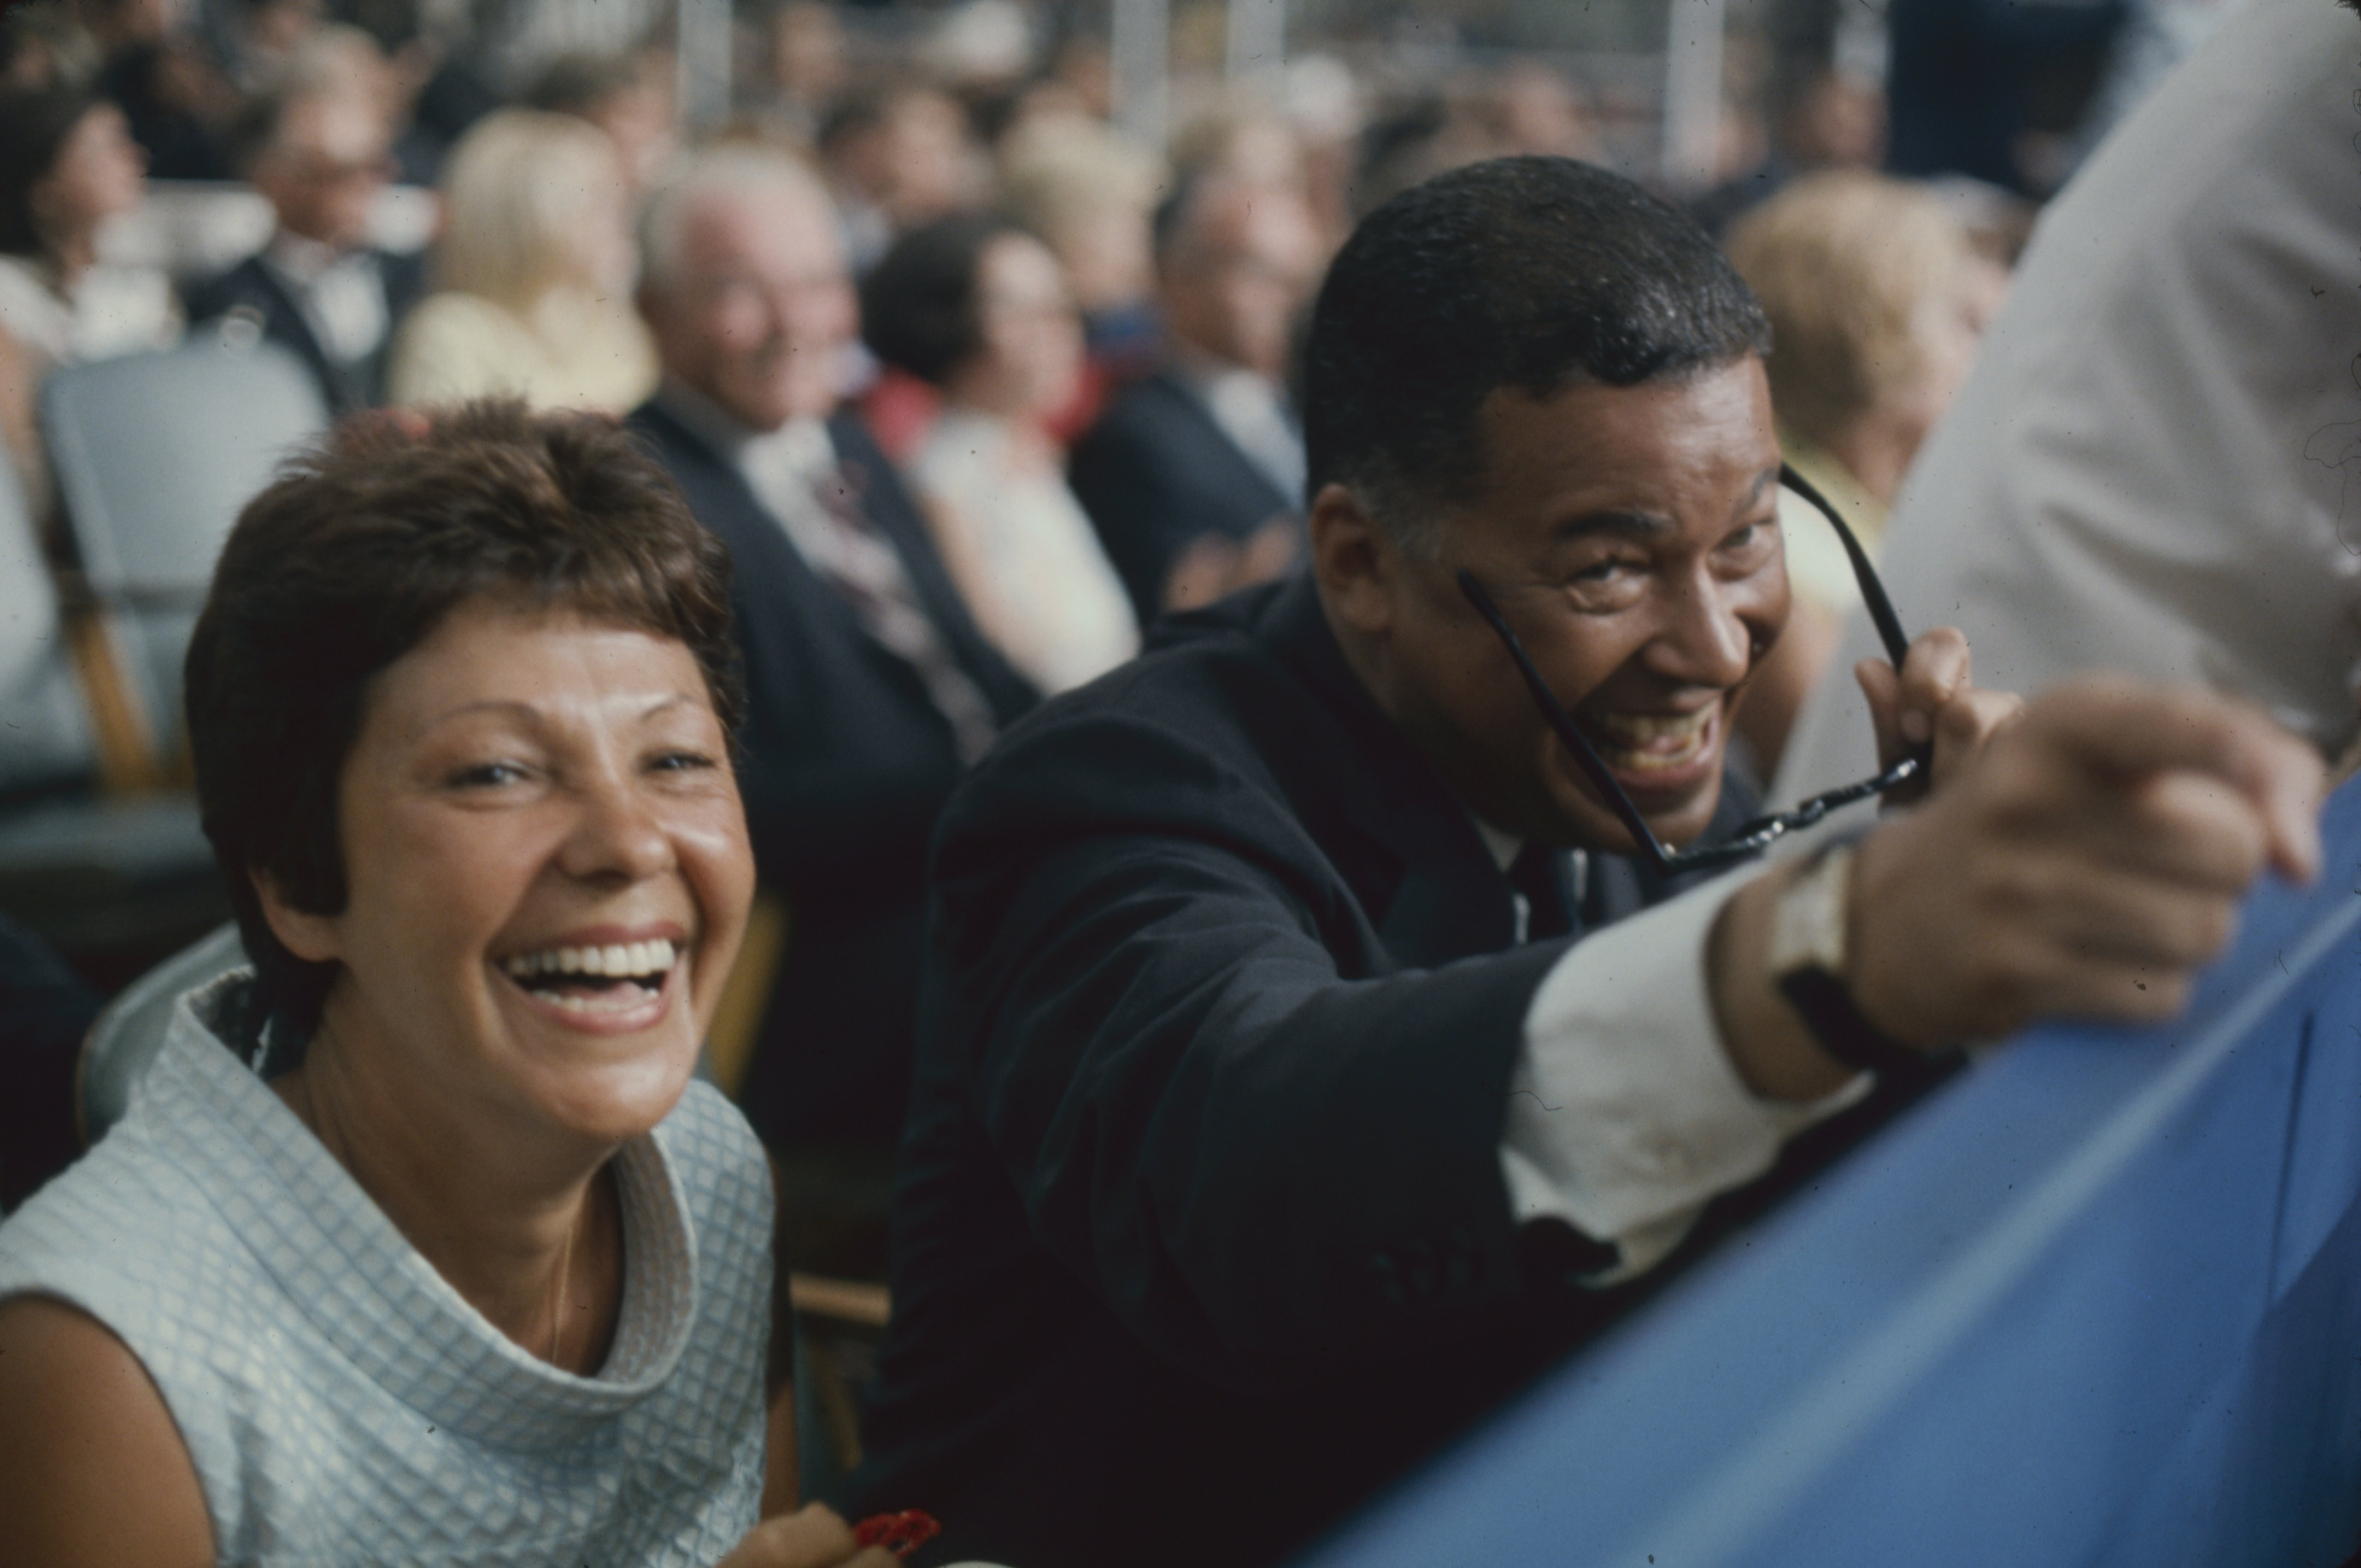 American politician Senator Edward Brooke and his wife, Remigia  laugh from their seats during Republican National Convention at the Miami Beach Convention Center, Miami Beach, Florida, August 8, 1968. | Source: Getty Images